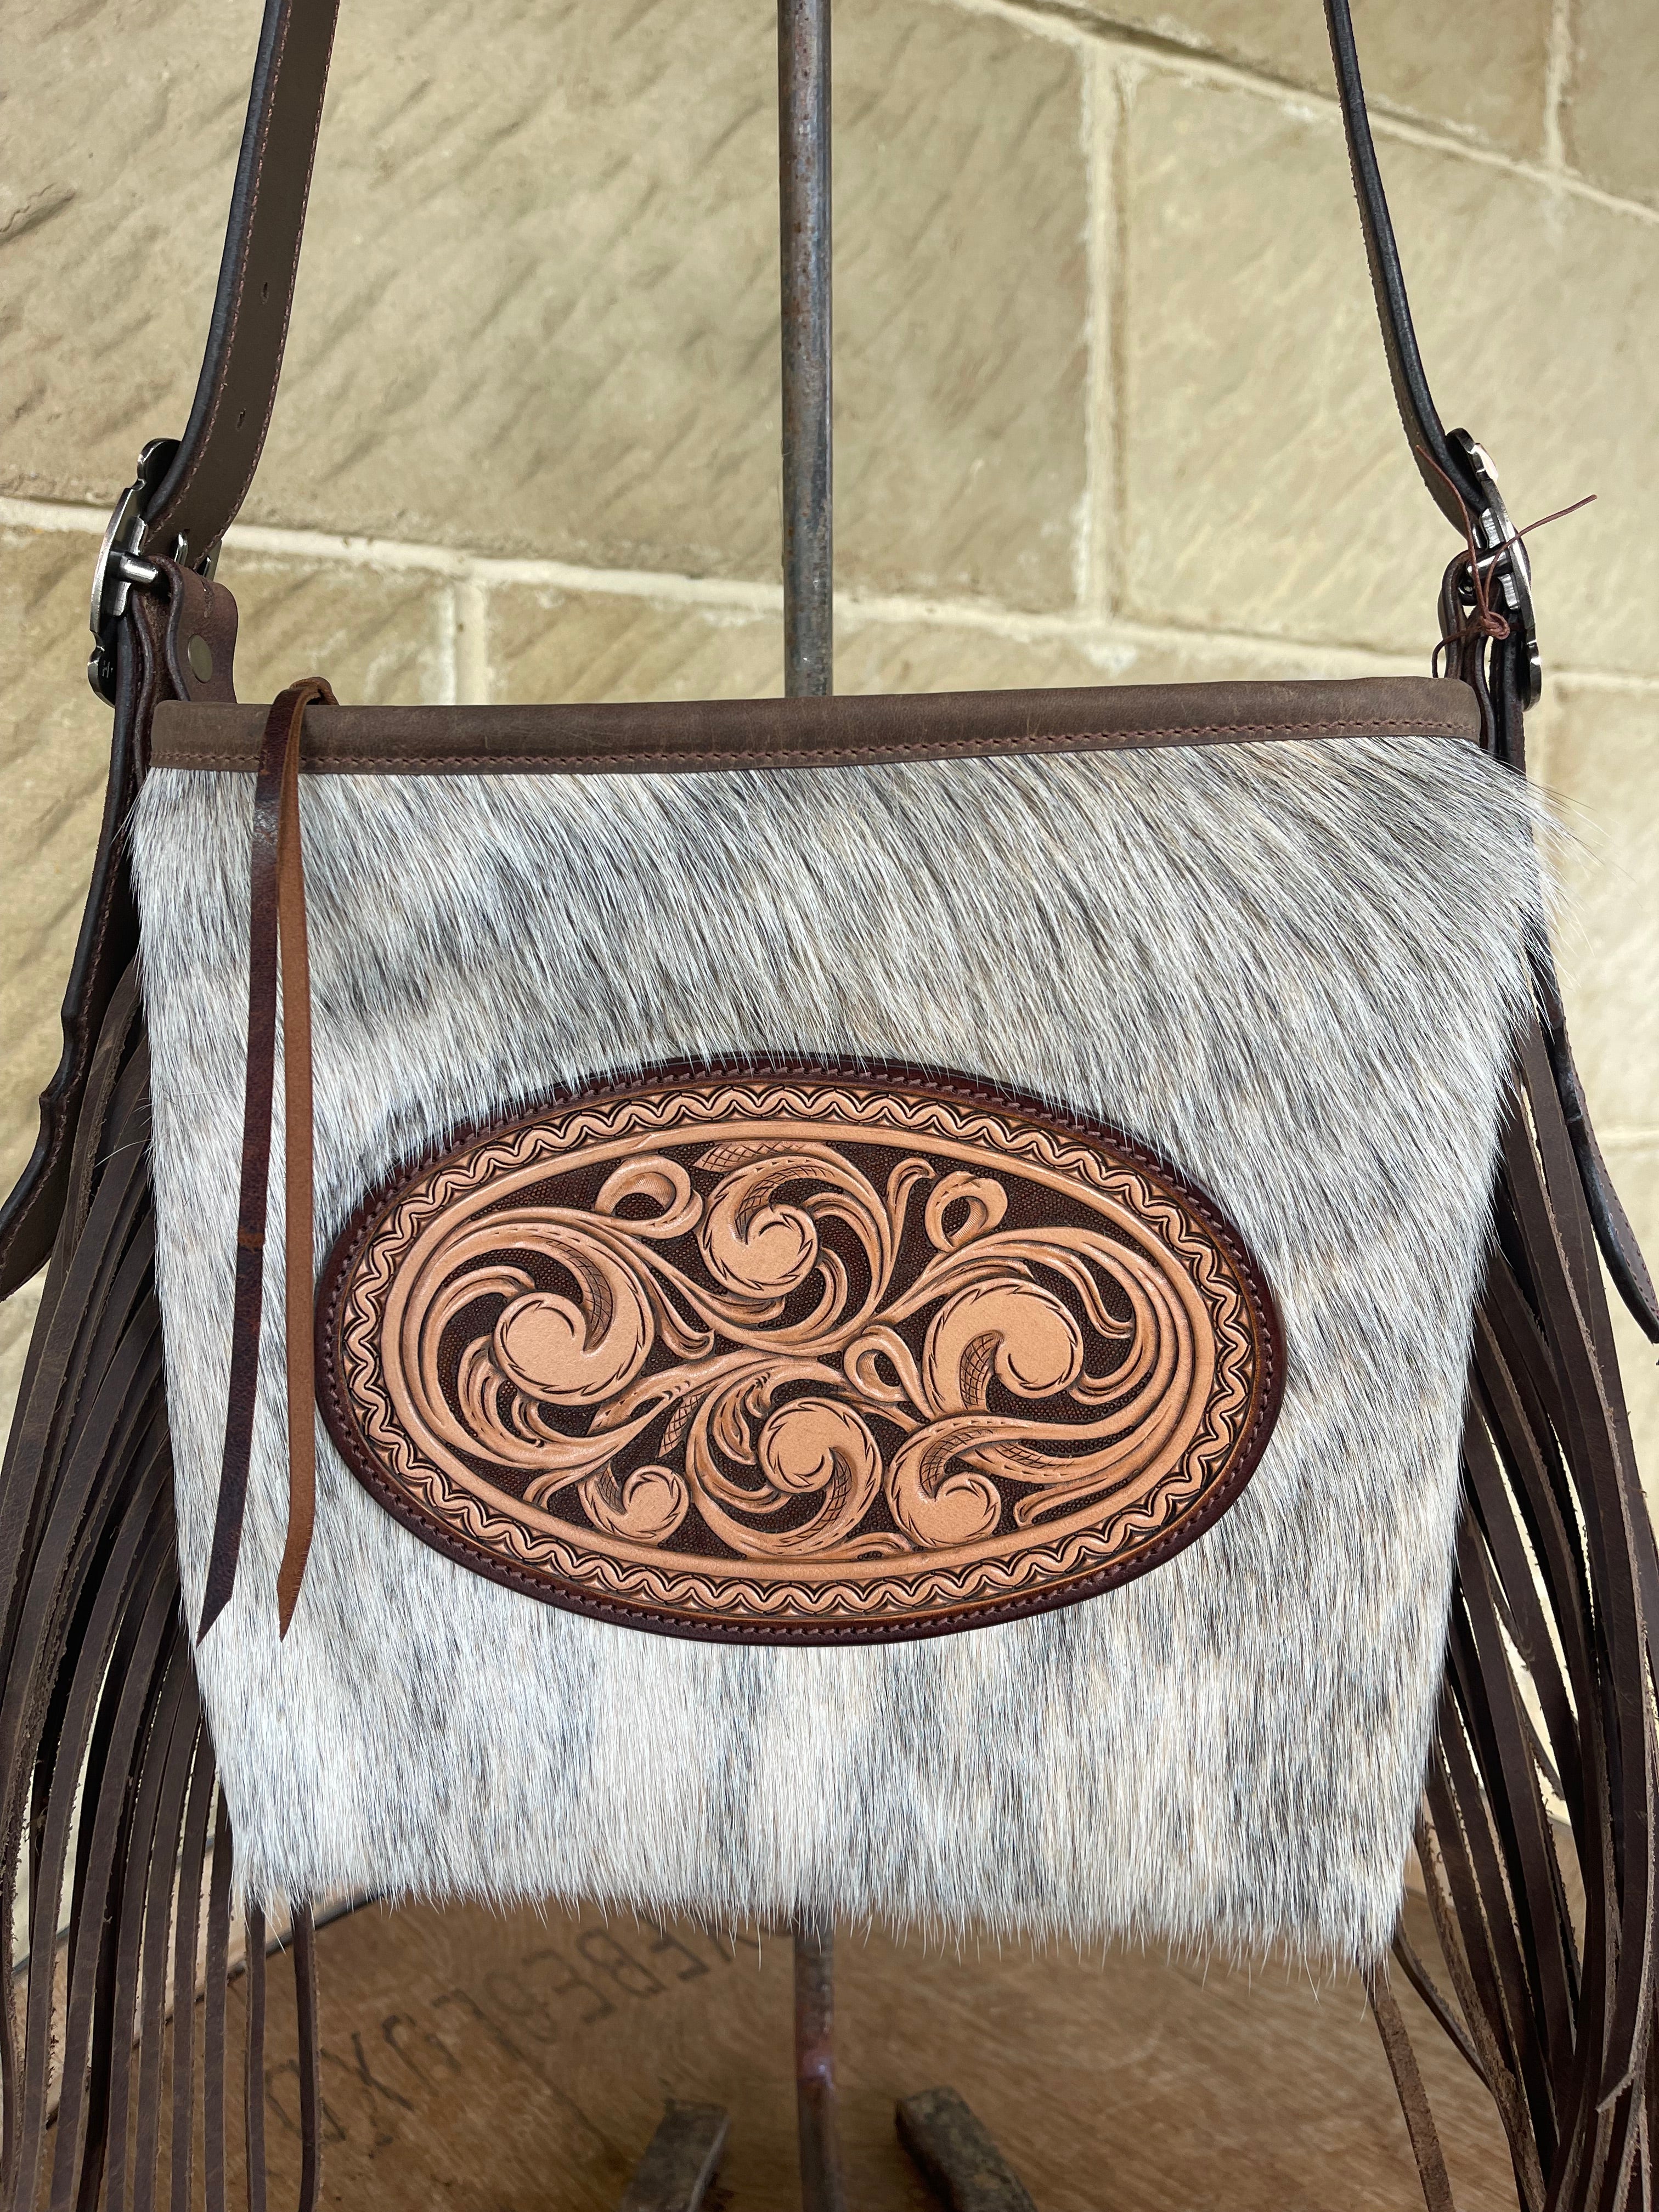 Cowhide crossbody fringe bag with unique oval carving